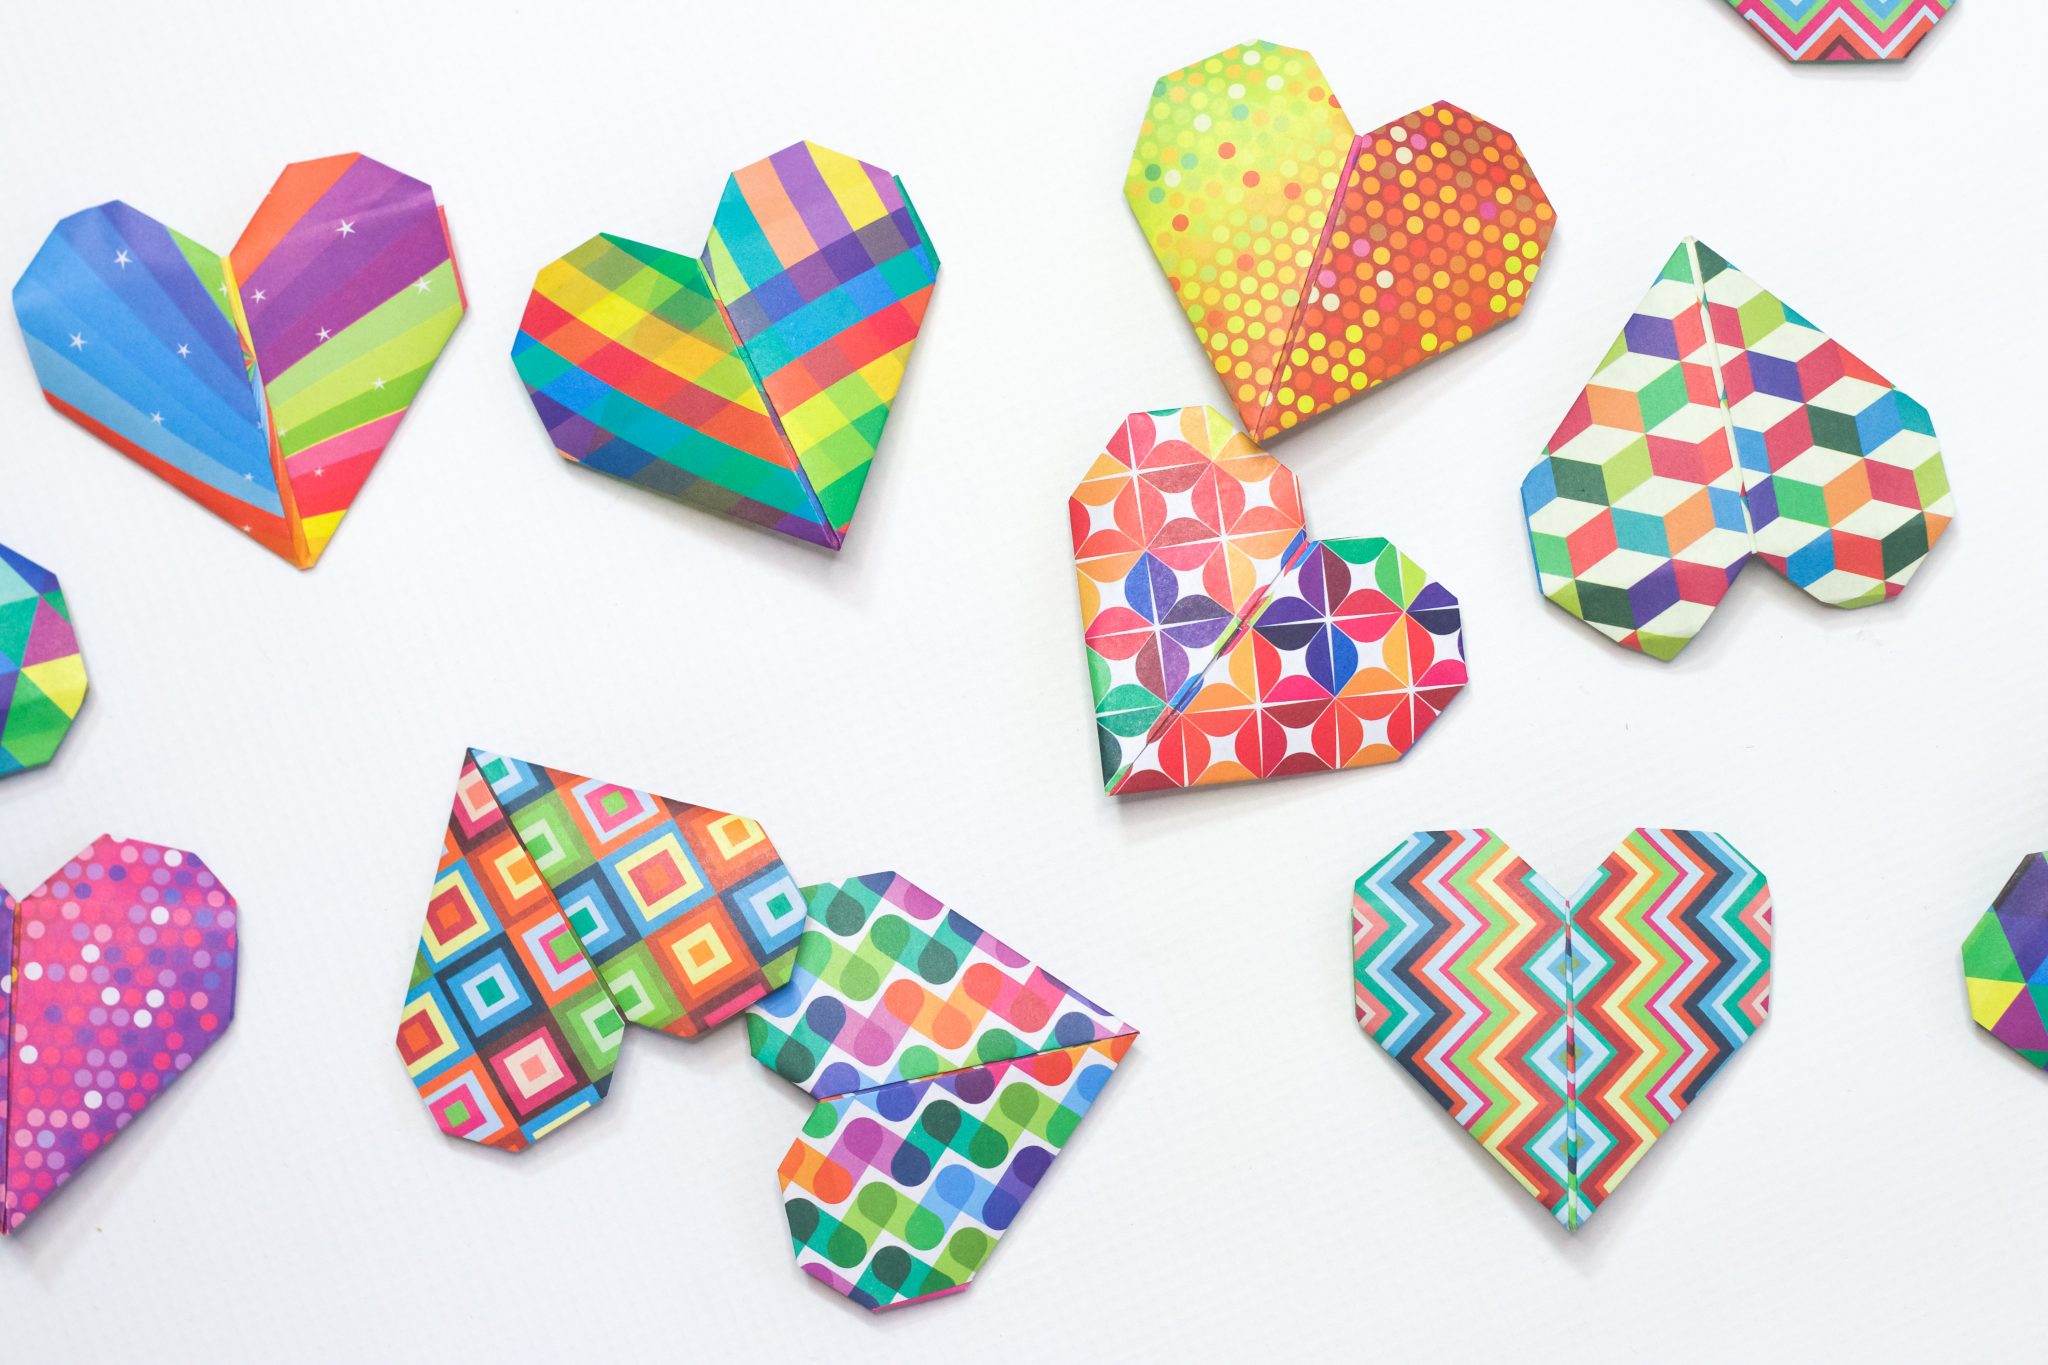 Making a paper heart is so easy and fun. With just a few simple